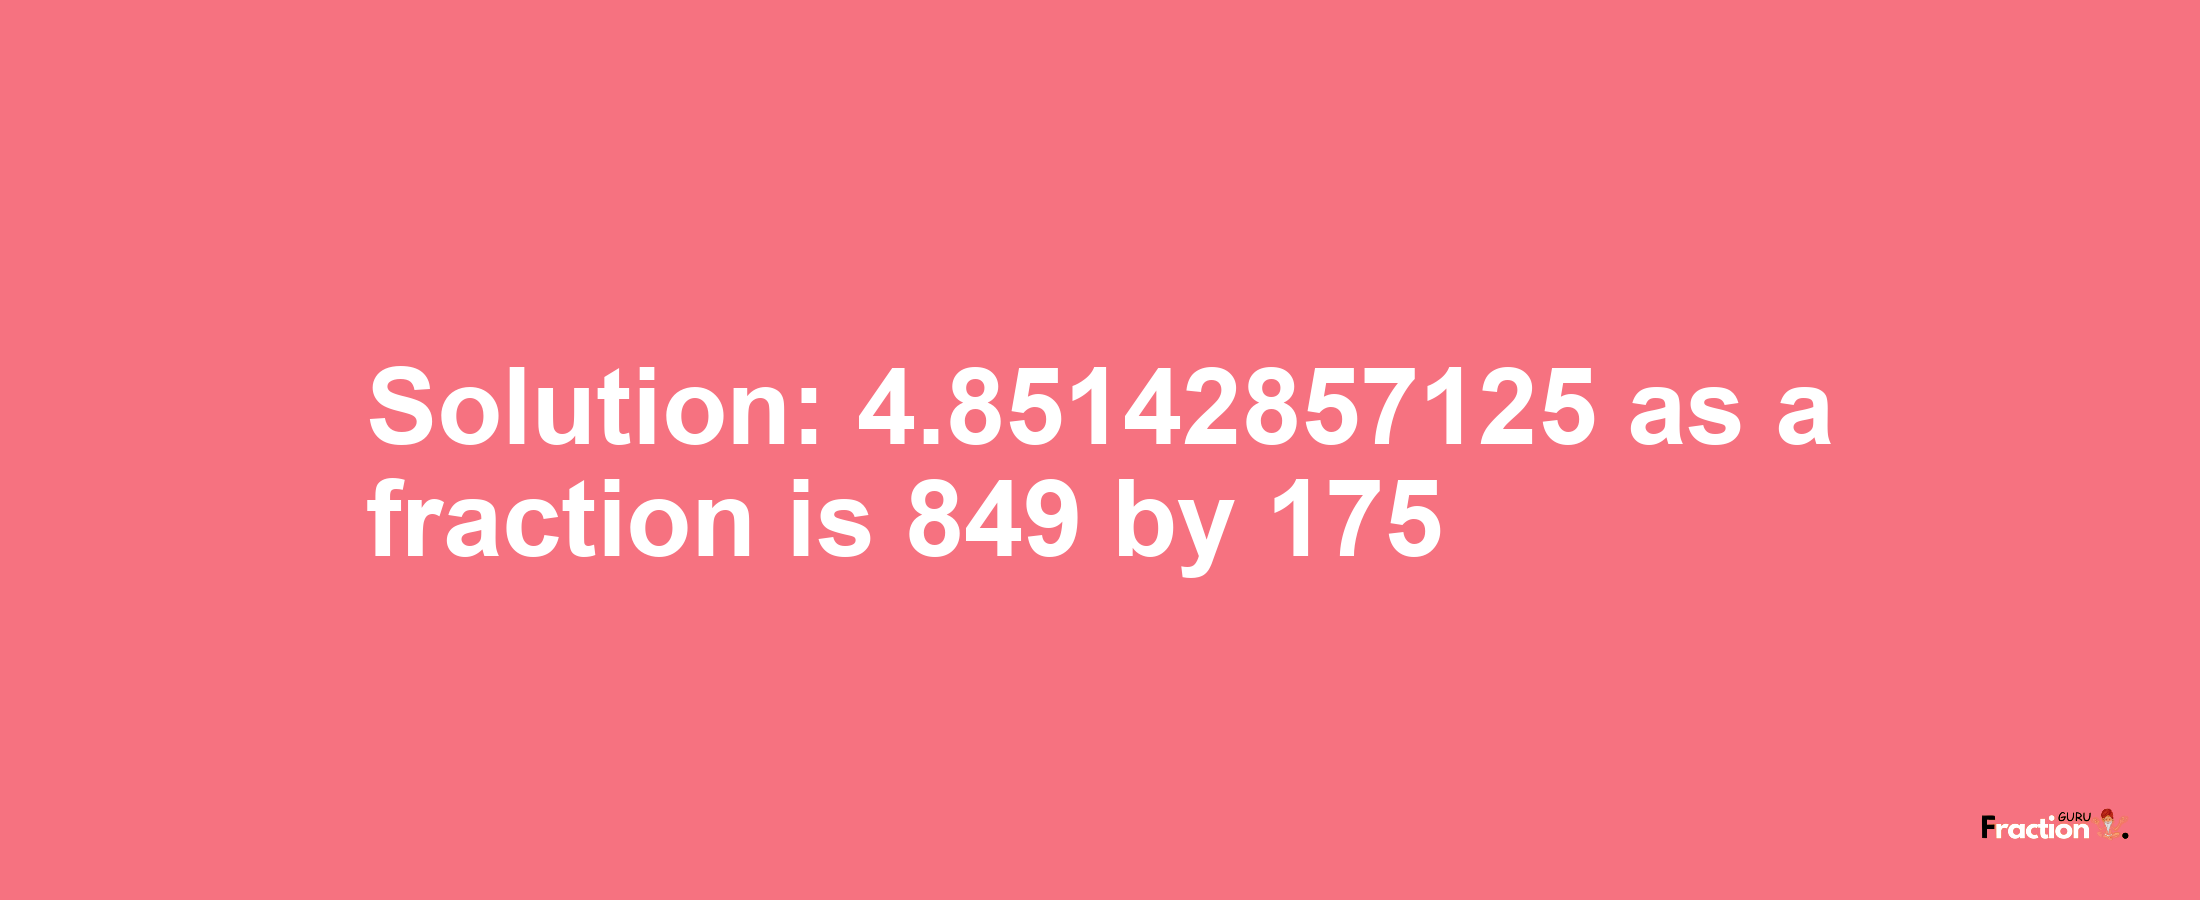 Solution:4.85142857125 as a fraction is 849/175